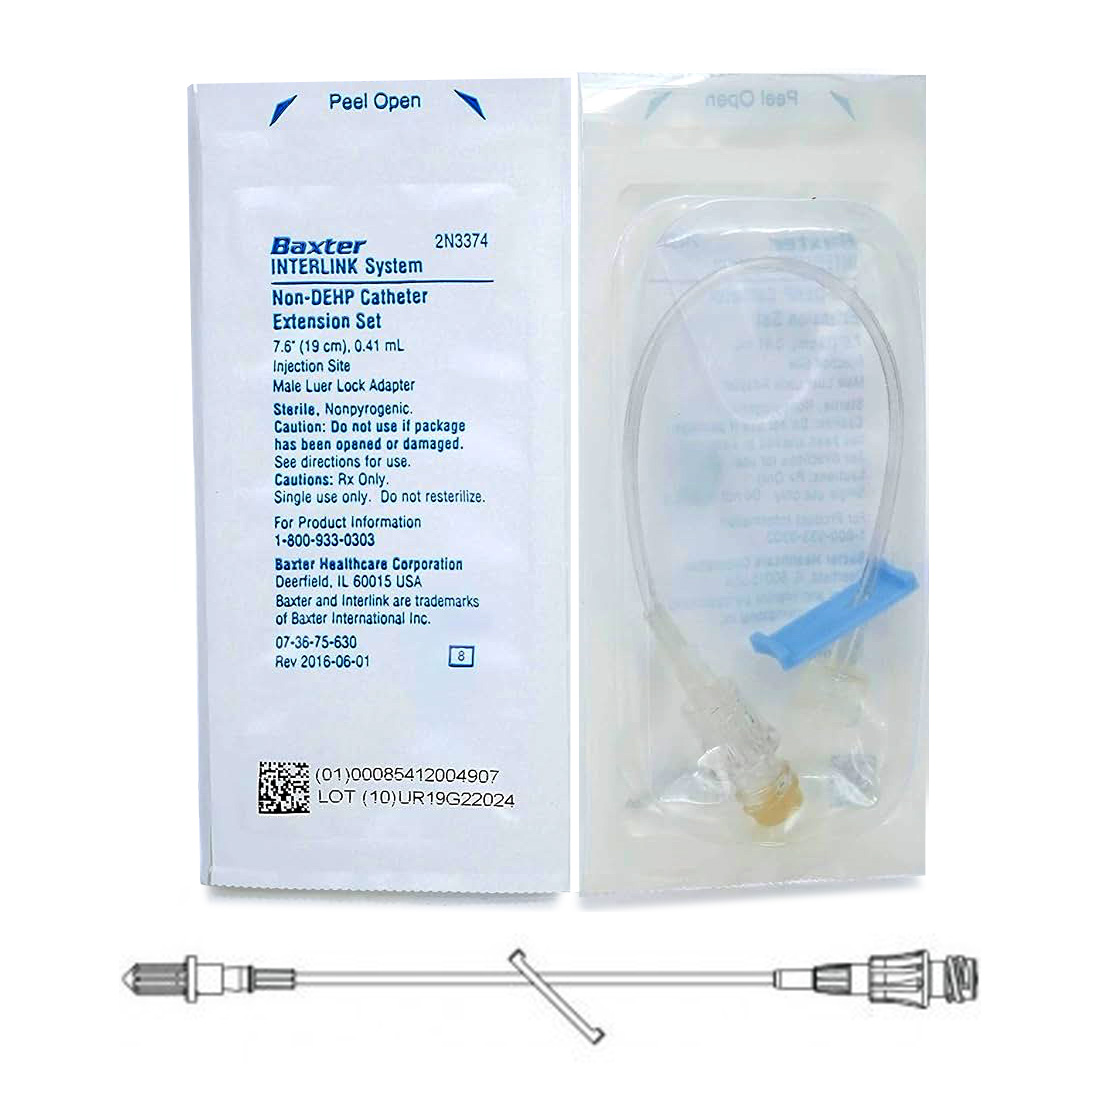 Box - I.V. Catheter Extension Set with INTERLINK Injection Site - 50/Box